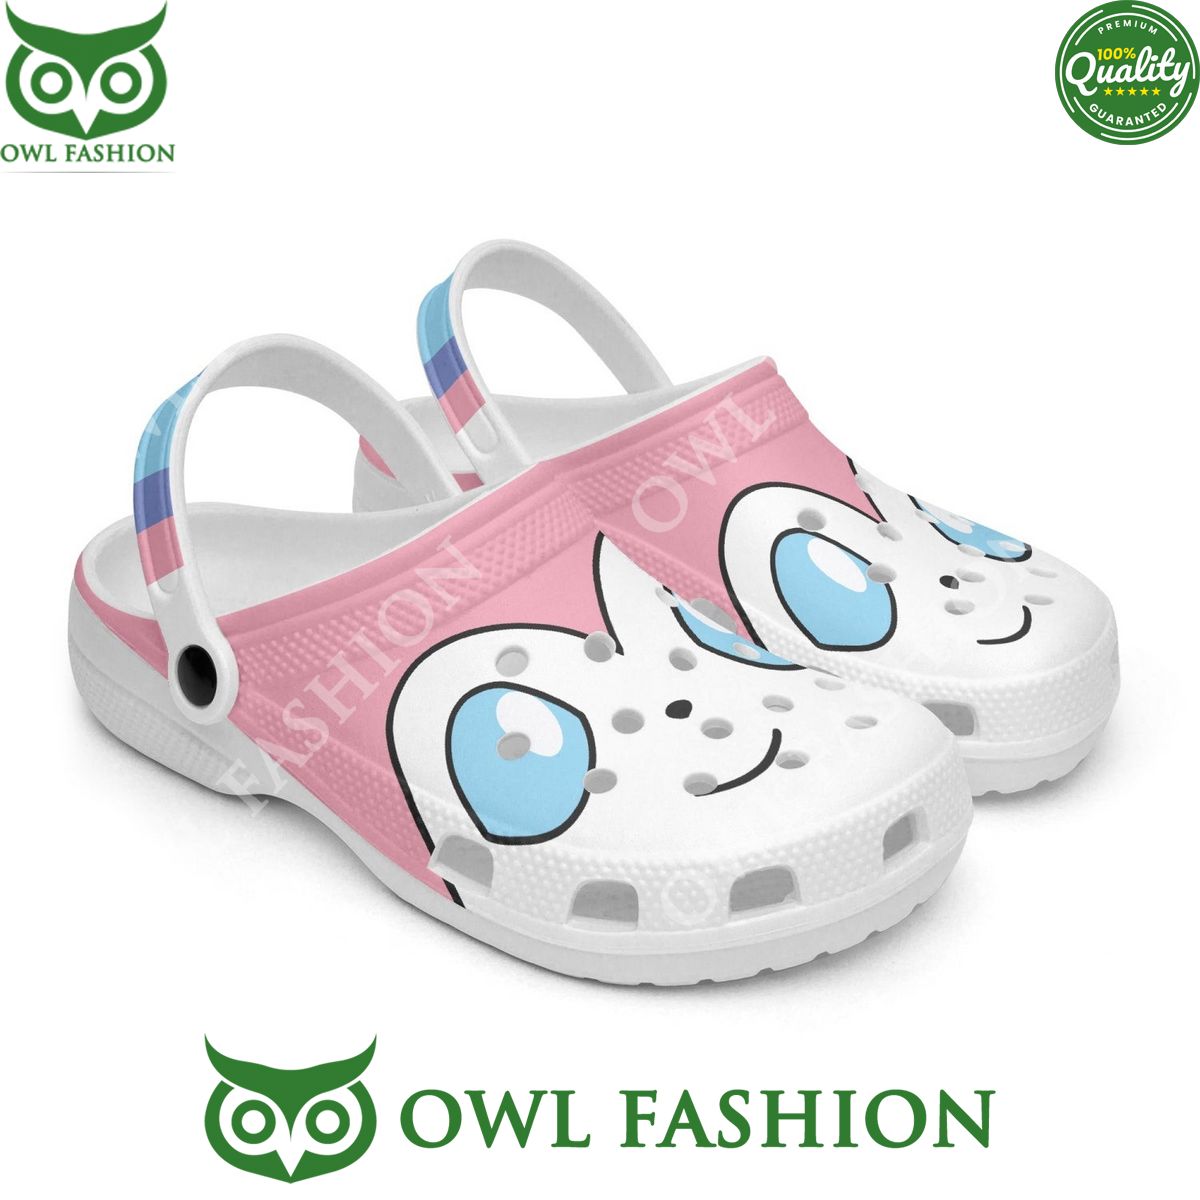 Sylveon Fairy type soothing aura Pokemon Crocs This design is a visual treat.